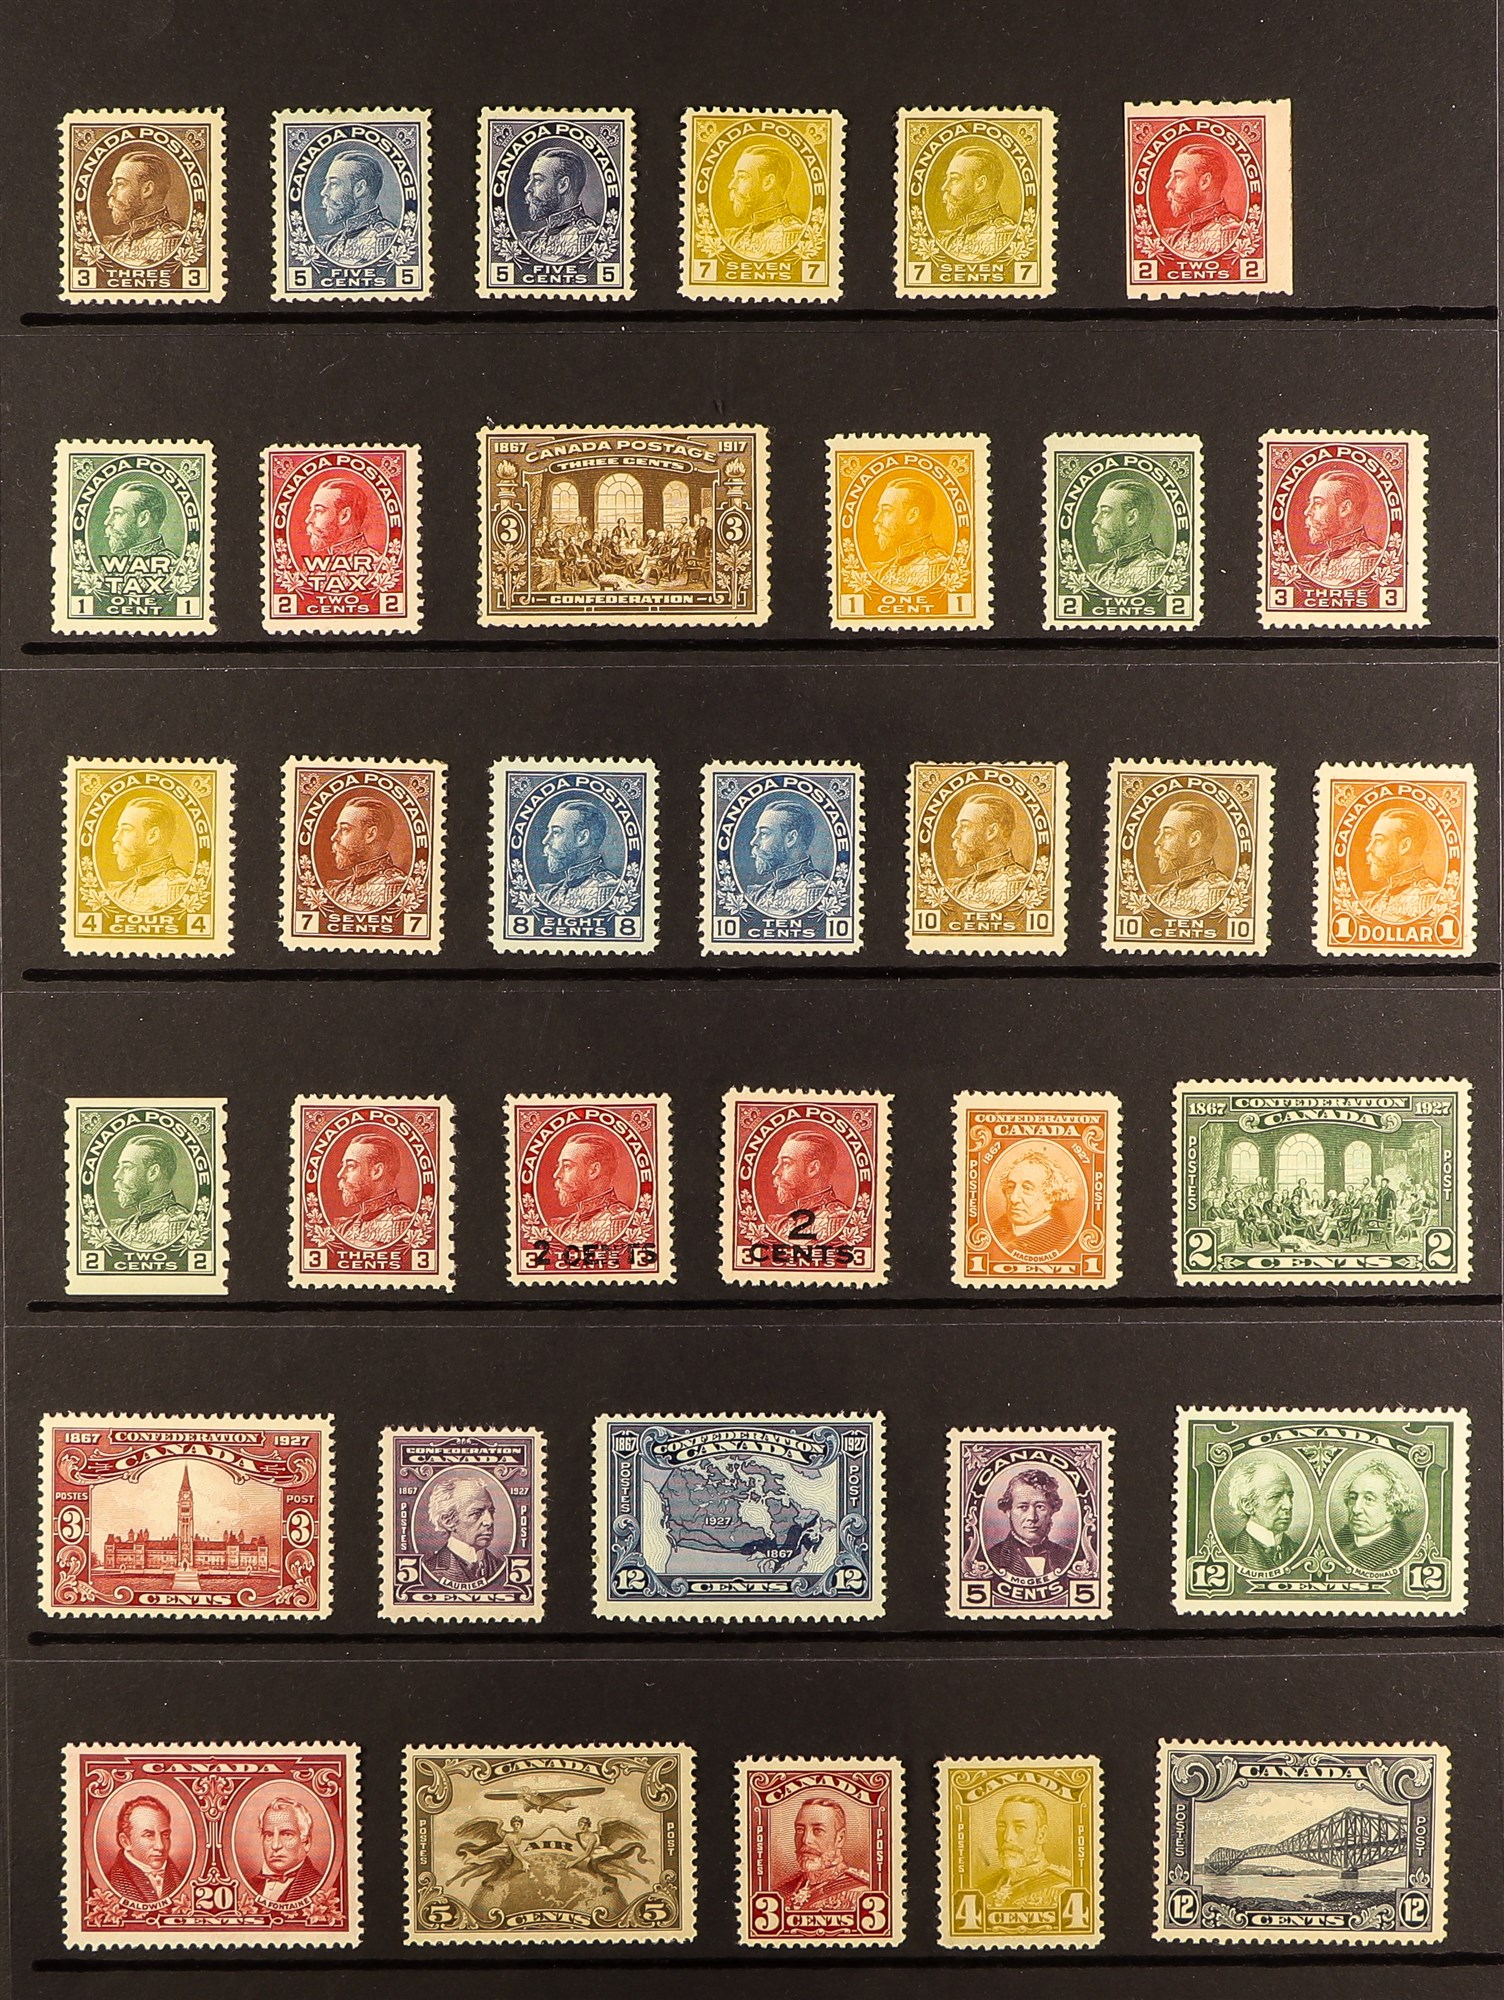 CANADA 1911-35 MINT COLLECTION incl. 1911-22 Admirals incl. 5c (2 shades), 7c (2 shades) and 2c perf